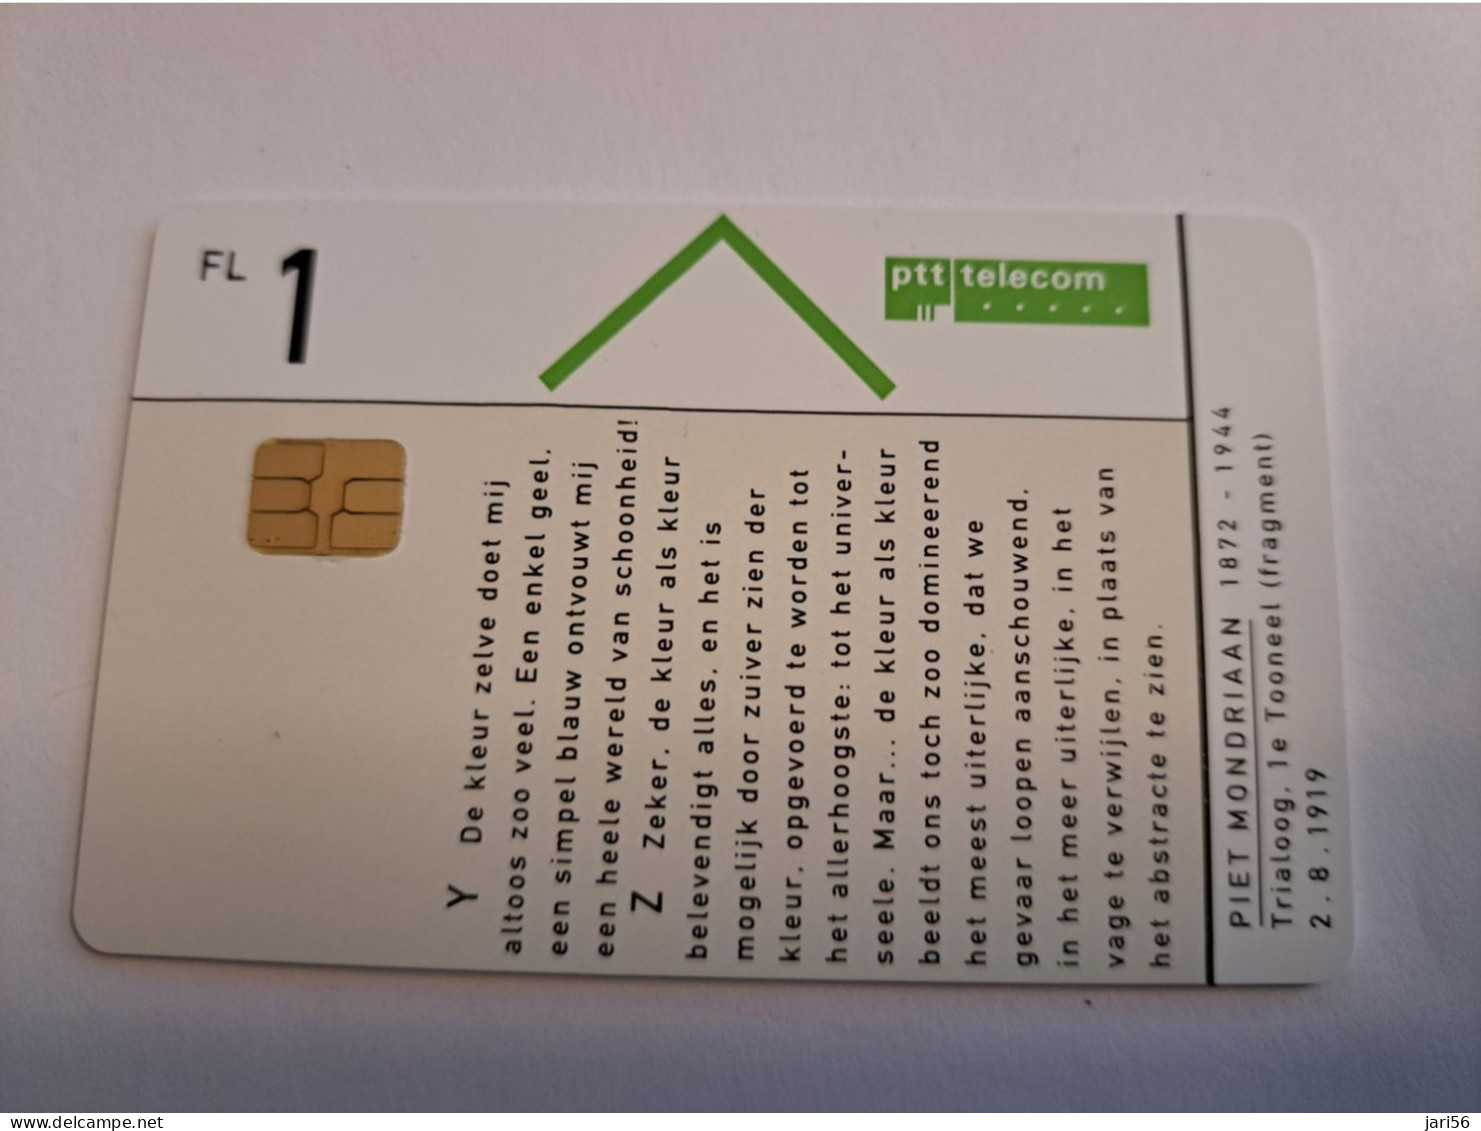 NETHERLANDS  HFL 1,00    CC  MINT CHIP CARD   / COMPLIMENTSCARD / FROM SERIE / MINT   ** 15956** - [3] Sim Cards, Prepaid & Refills